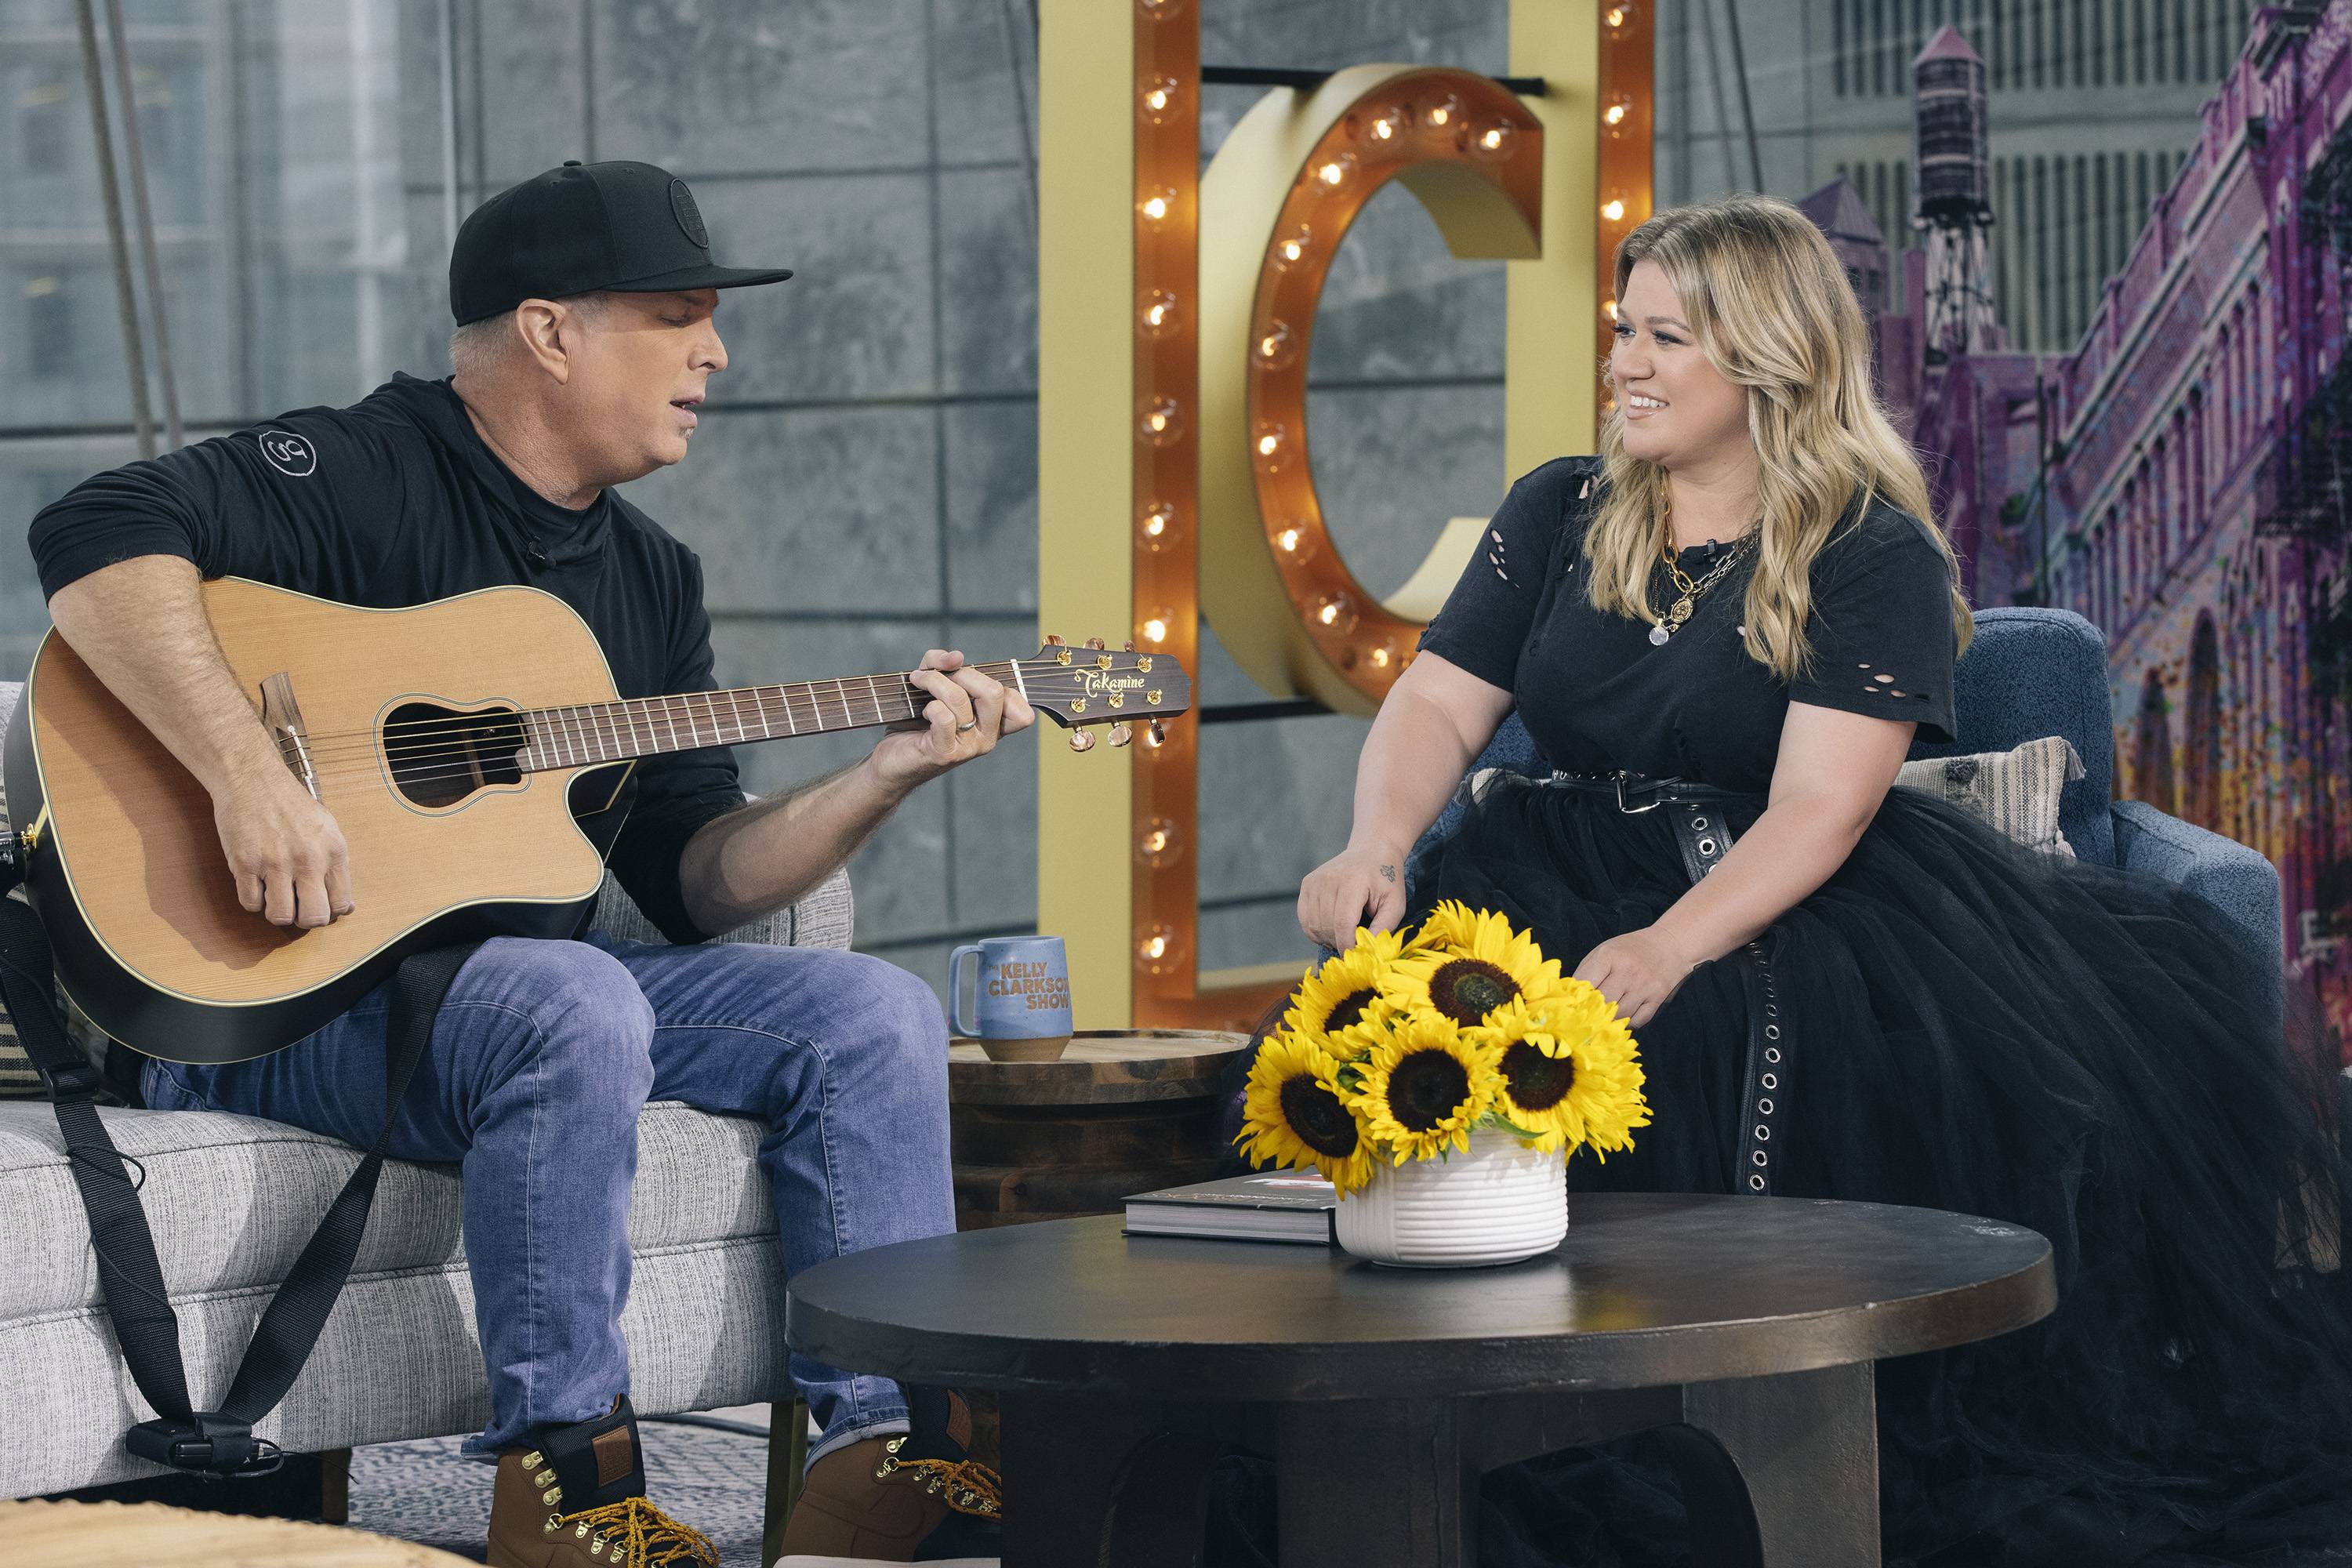 THE KELLY CLARKSON SHOW -- Episode J001 -- Pictured: (l-r) Garth Brooks, Kelly Clarkson 